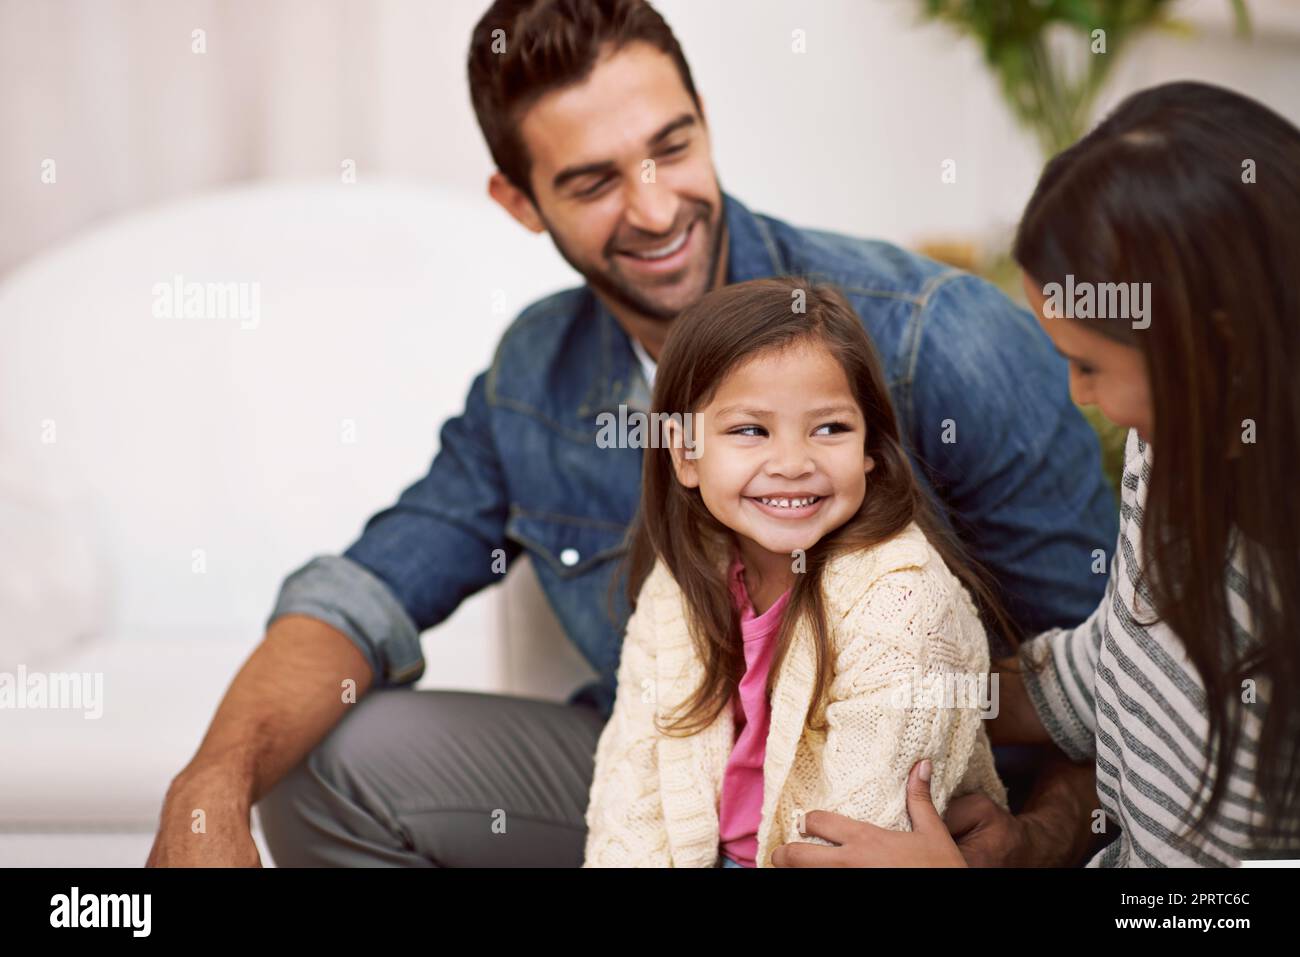 Theres an abundance of love in this home. a happy family spending quality time together at home. Stock Photo